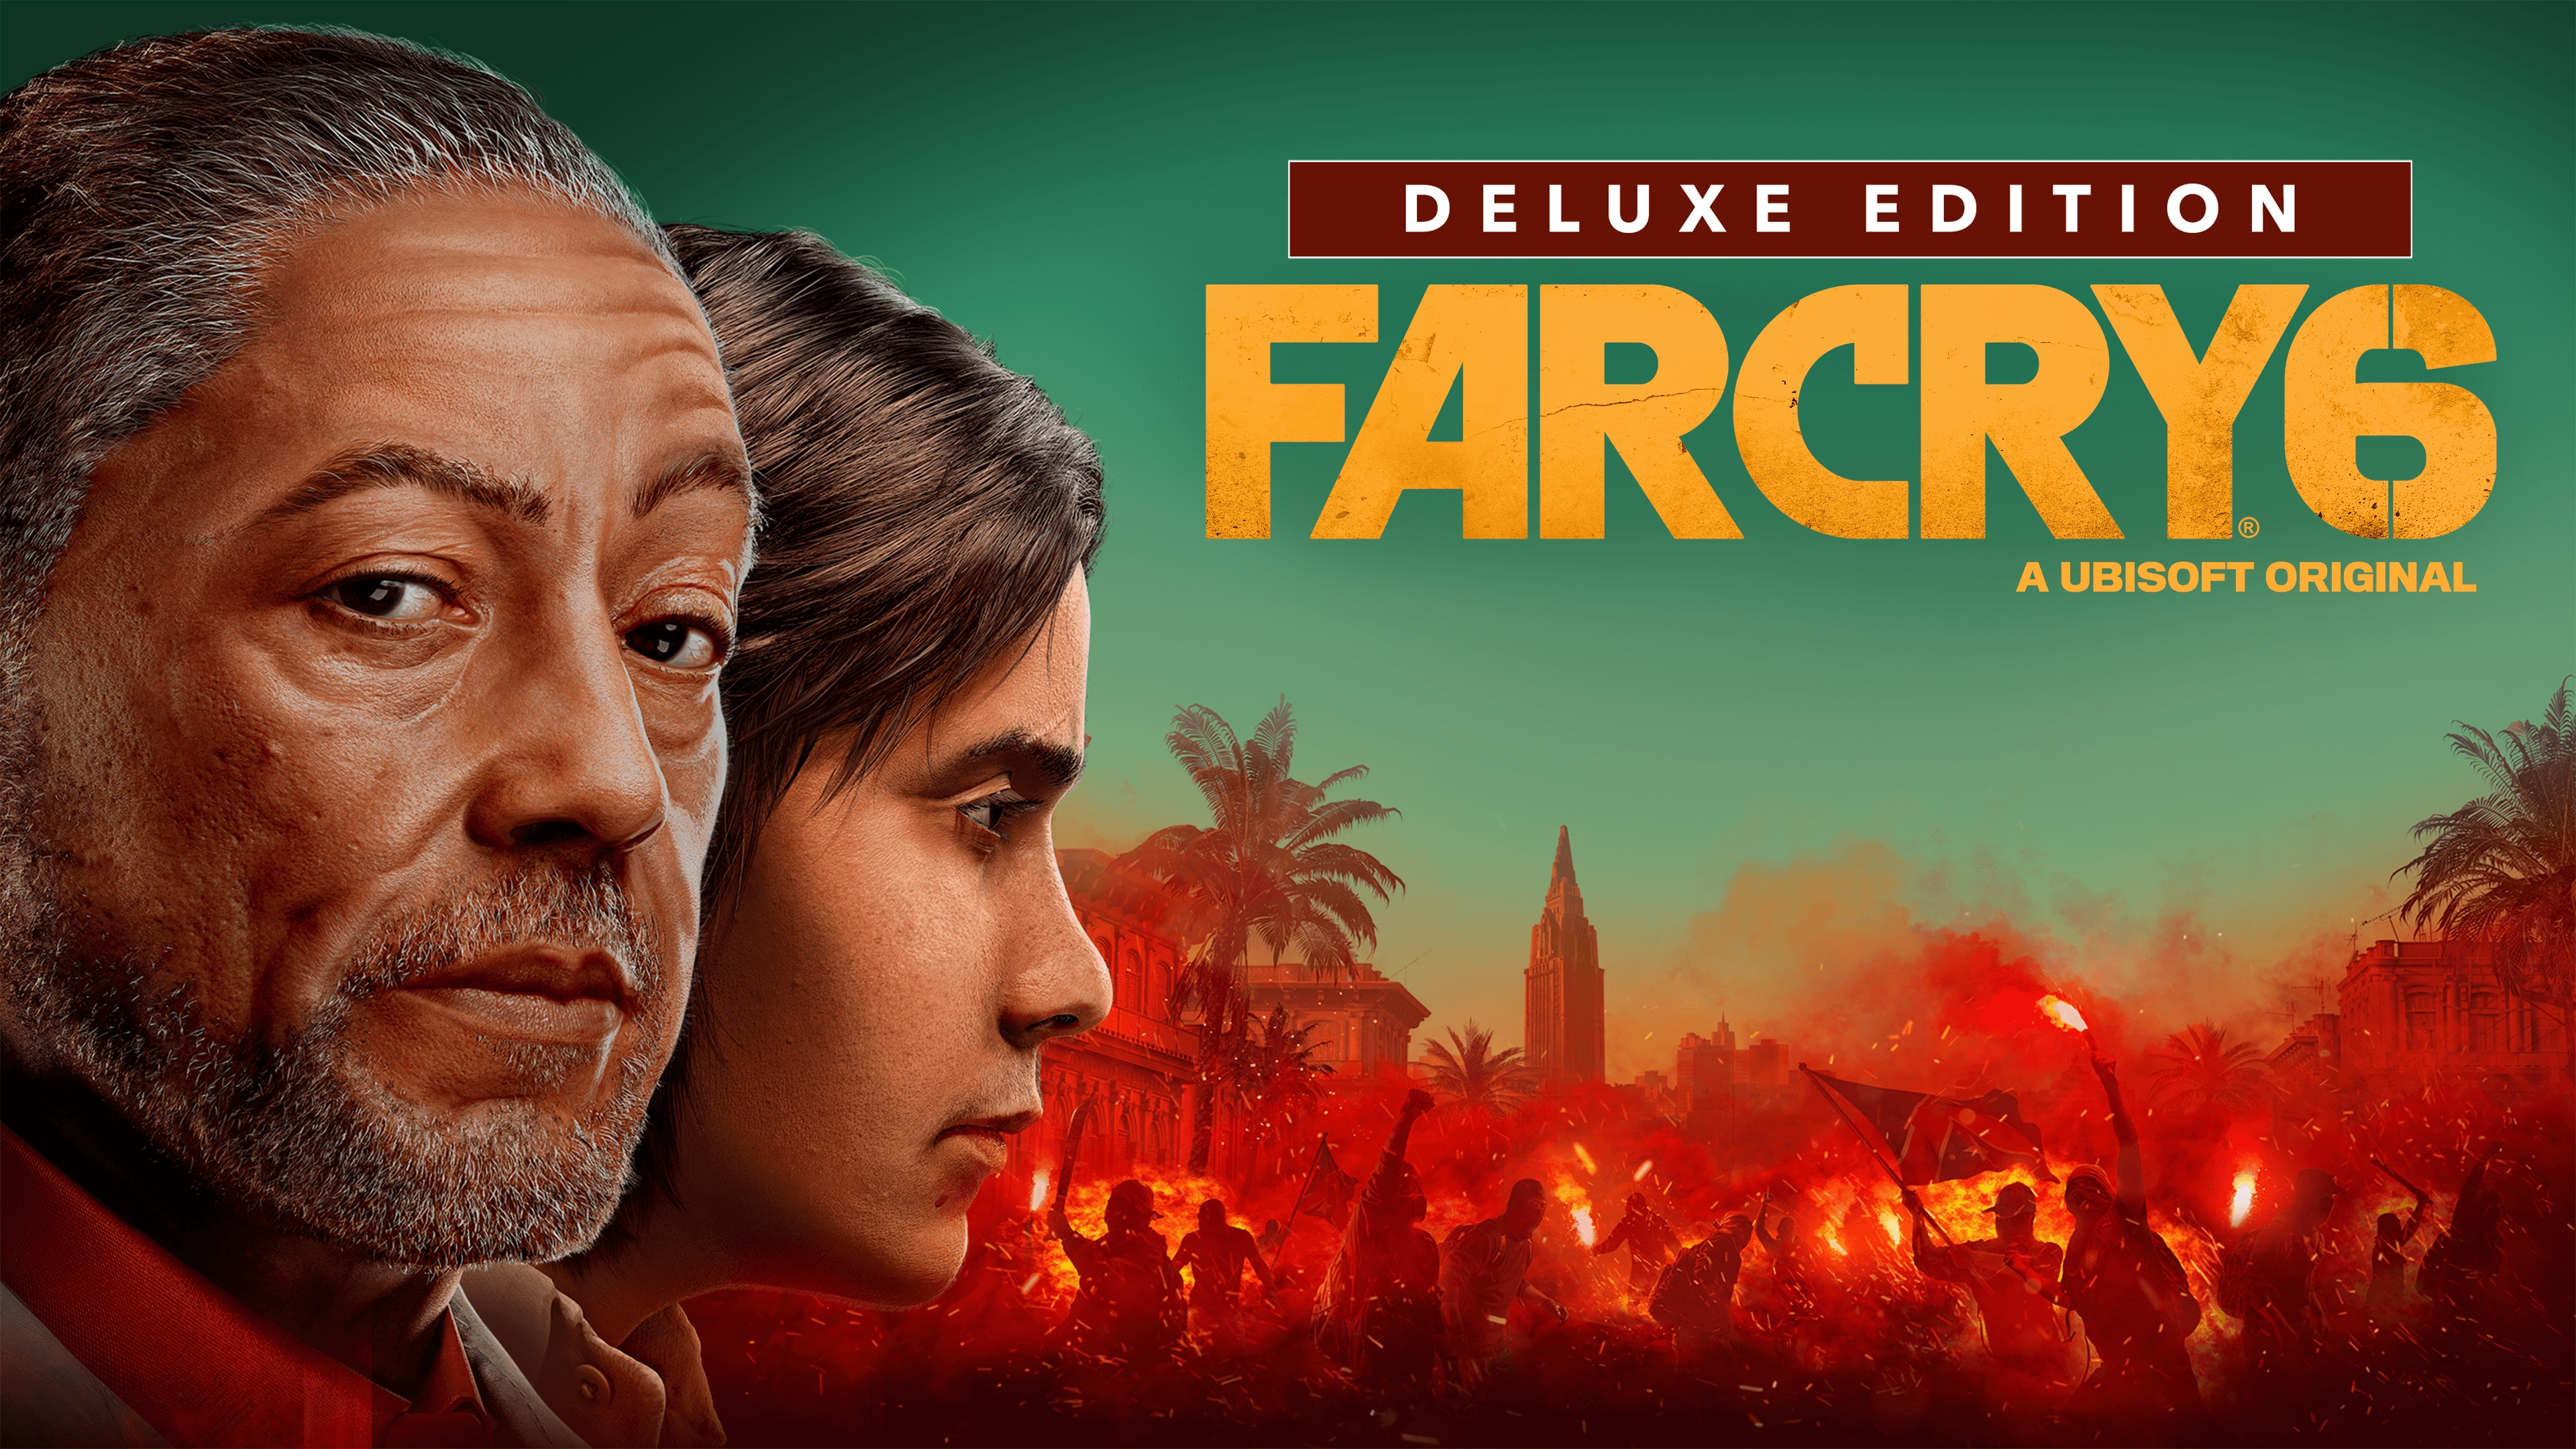 Far Cry 6 Crossplay and Multiplayer - What You Need To Know